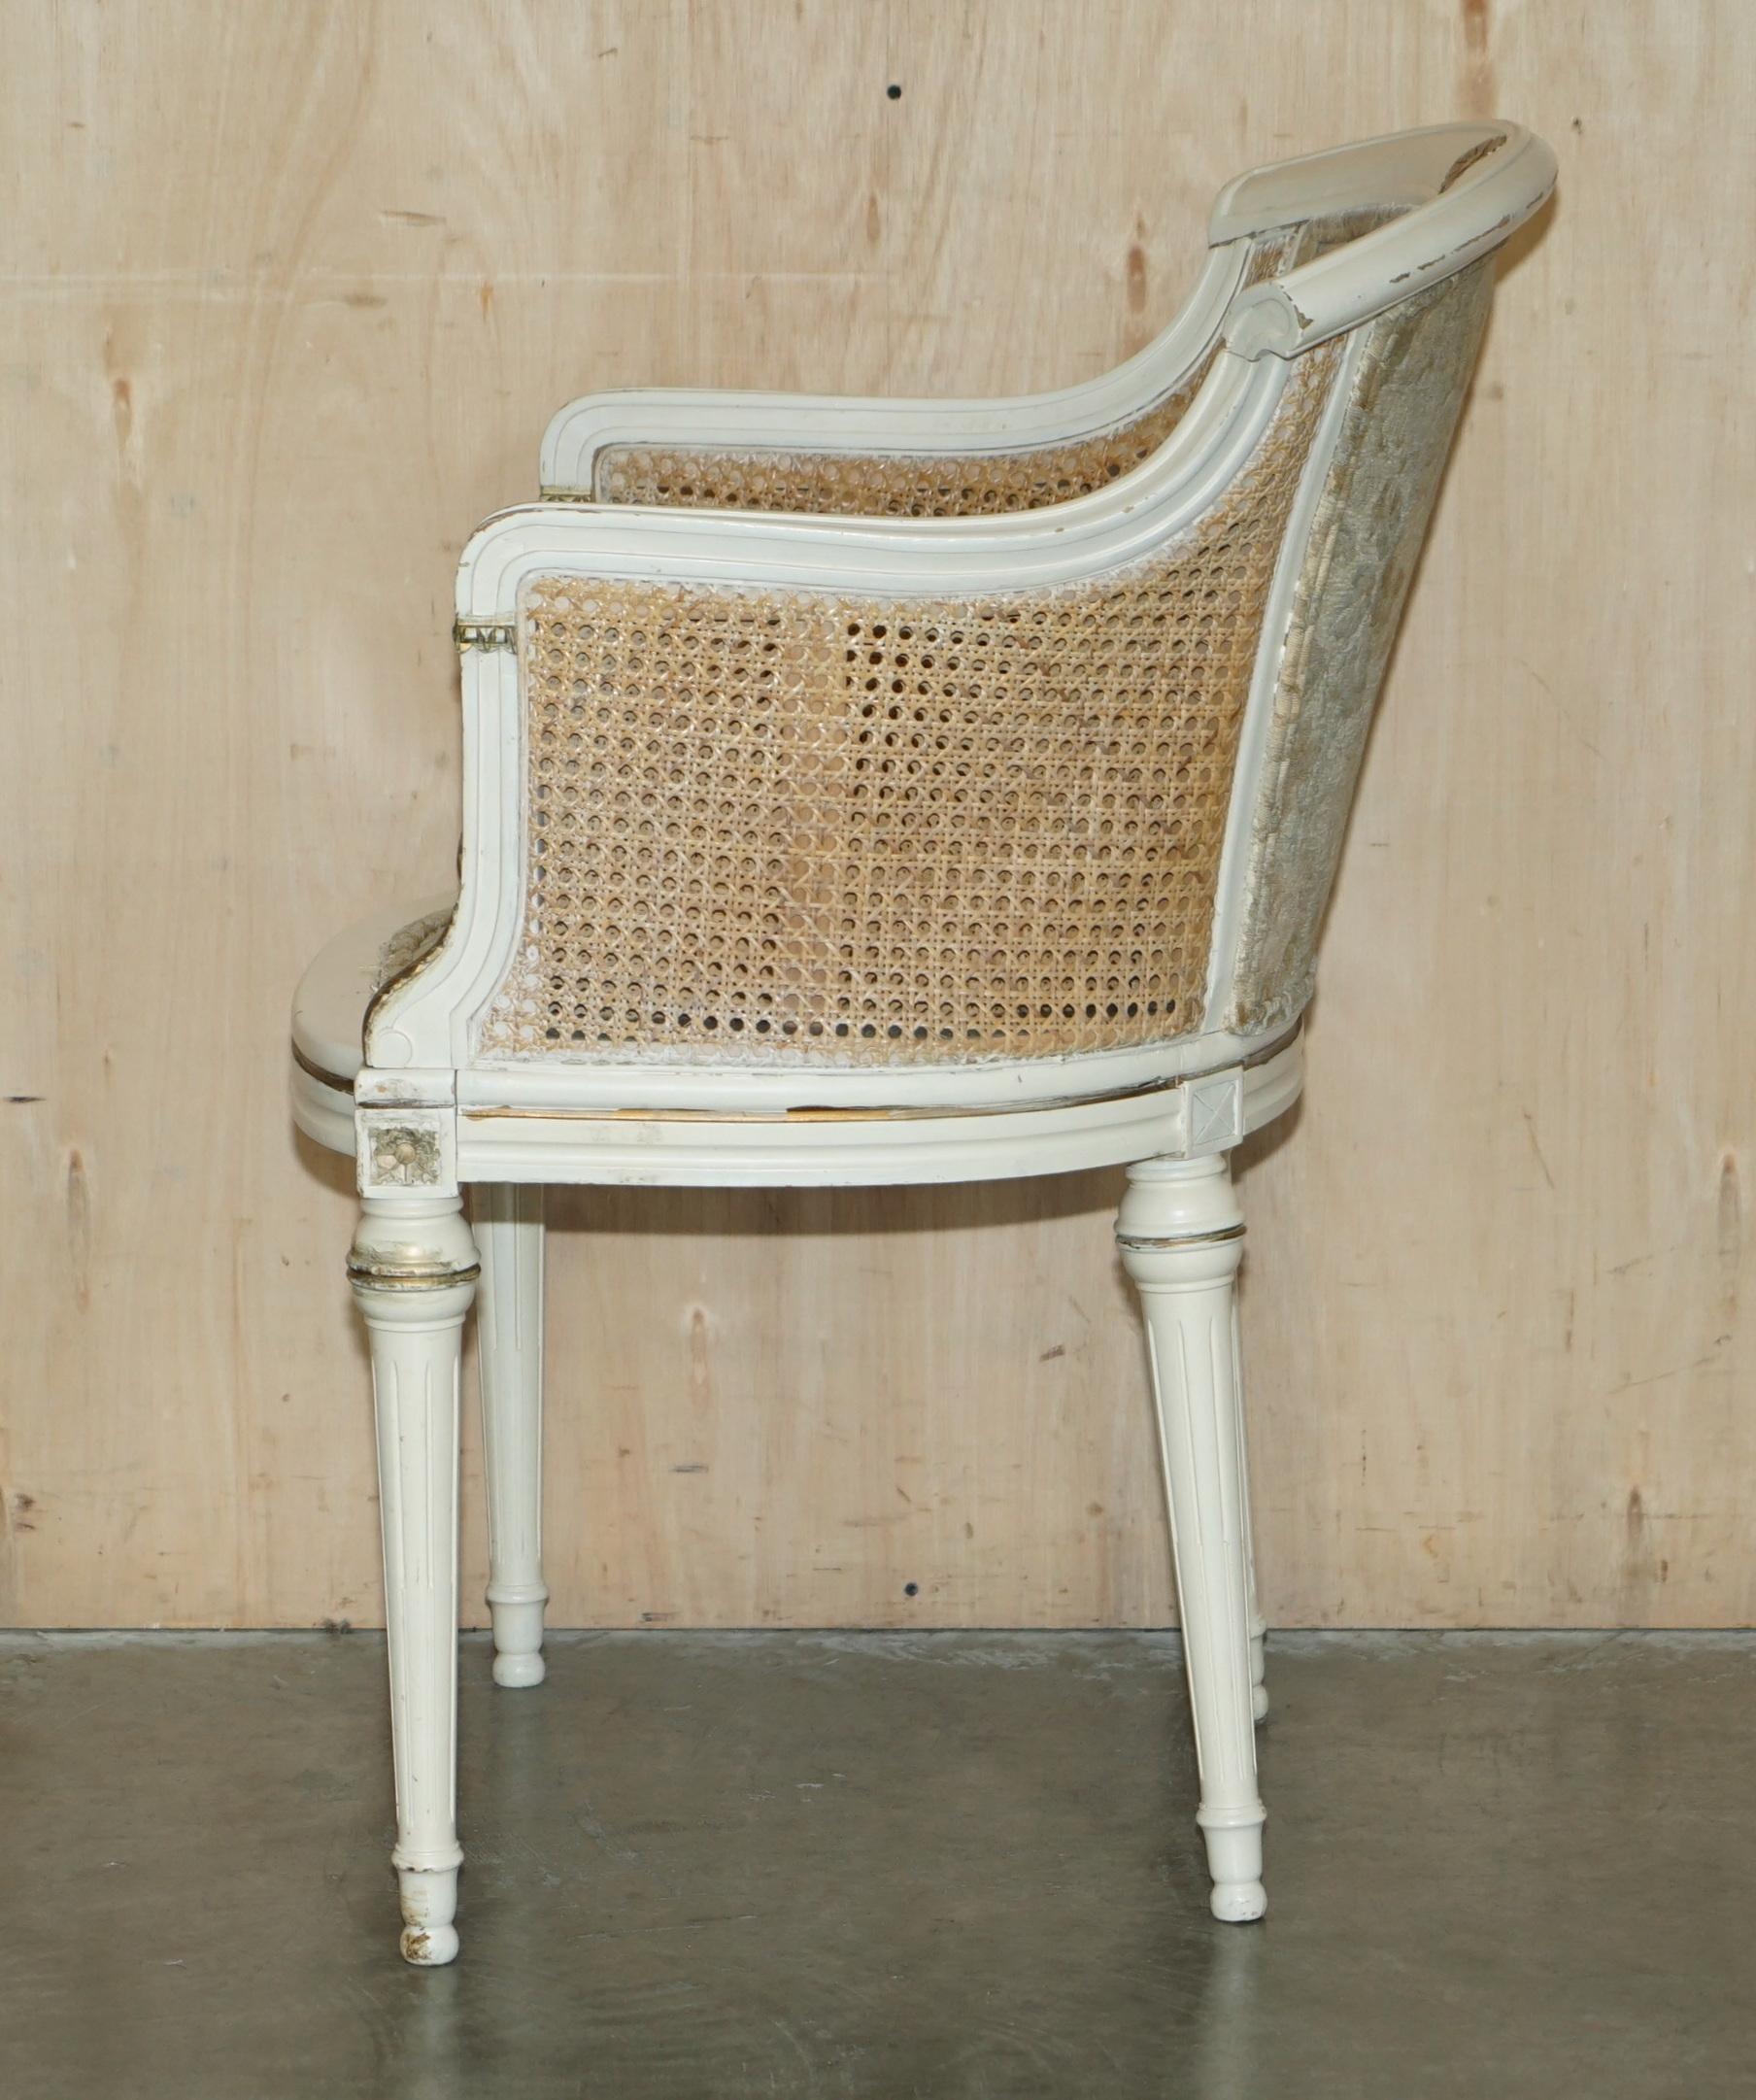 VINTAGE FRENCH COUNTRY HOUSE 1940er ORIGINAL PAINT BERGERE RATTAN ARMCHAIr im Angebot 12